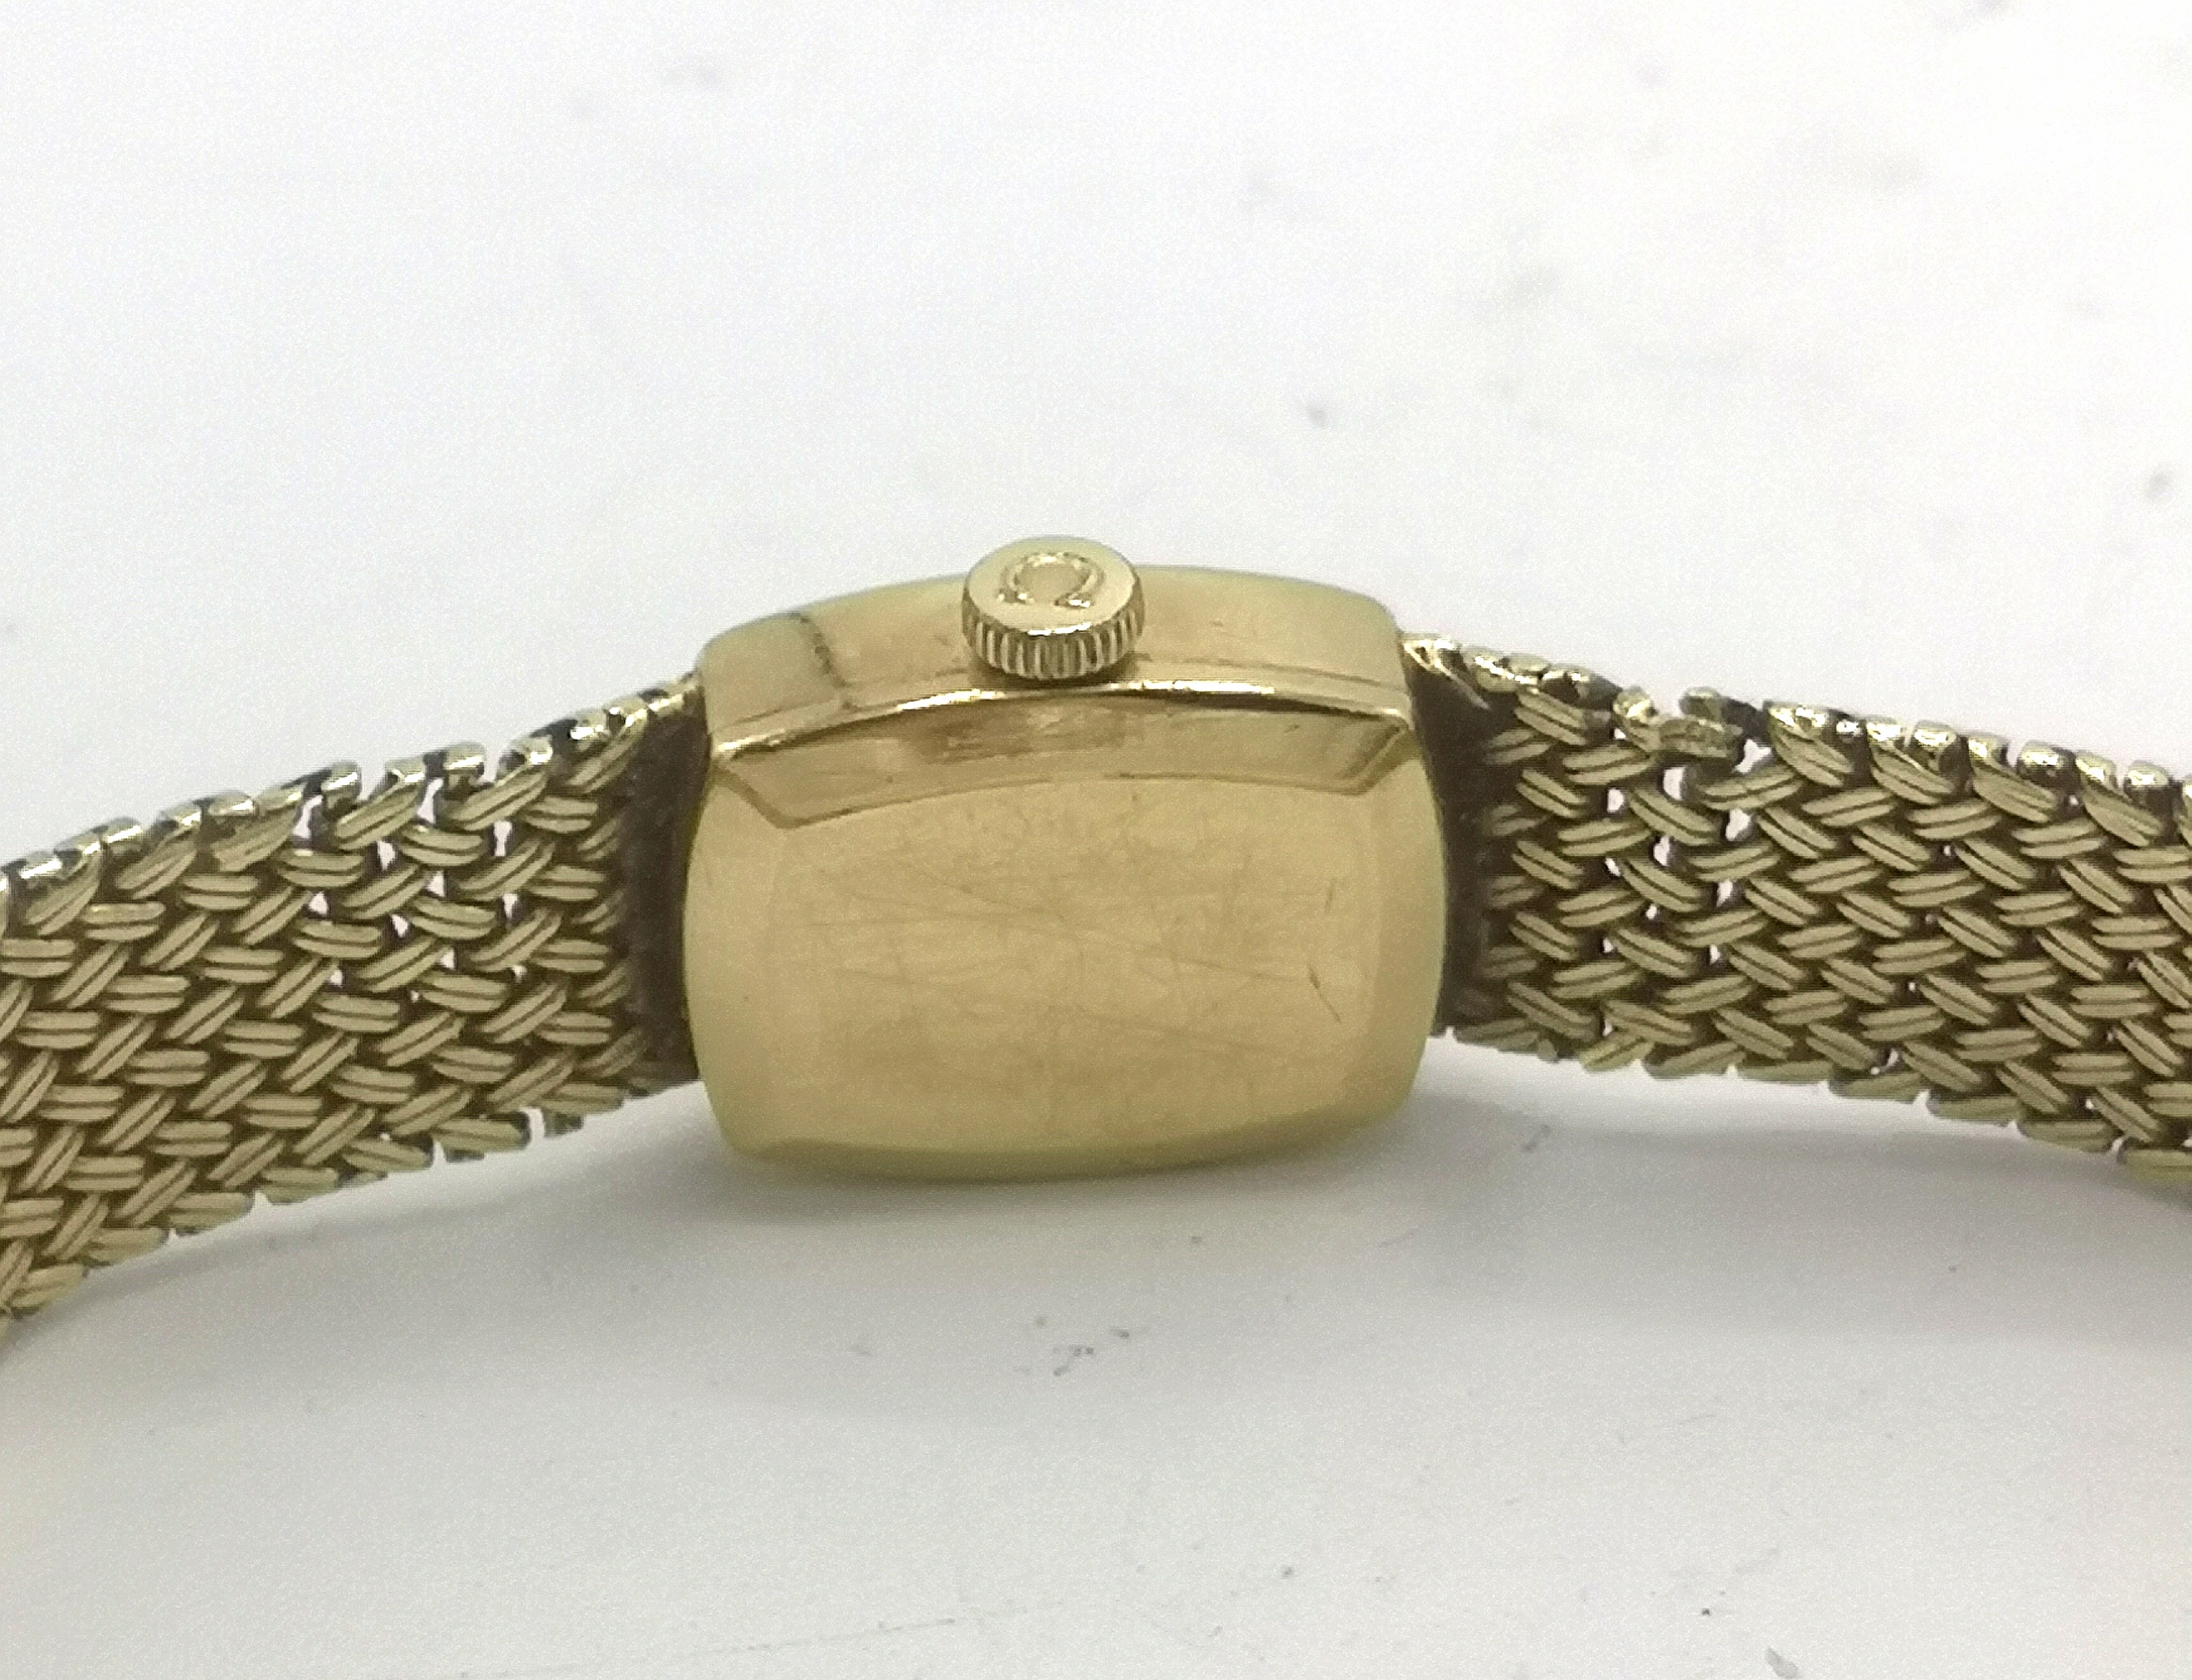 Ladies Omega wristwatch in 9ct gold case - Image 5 of 8